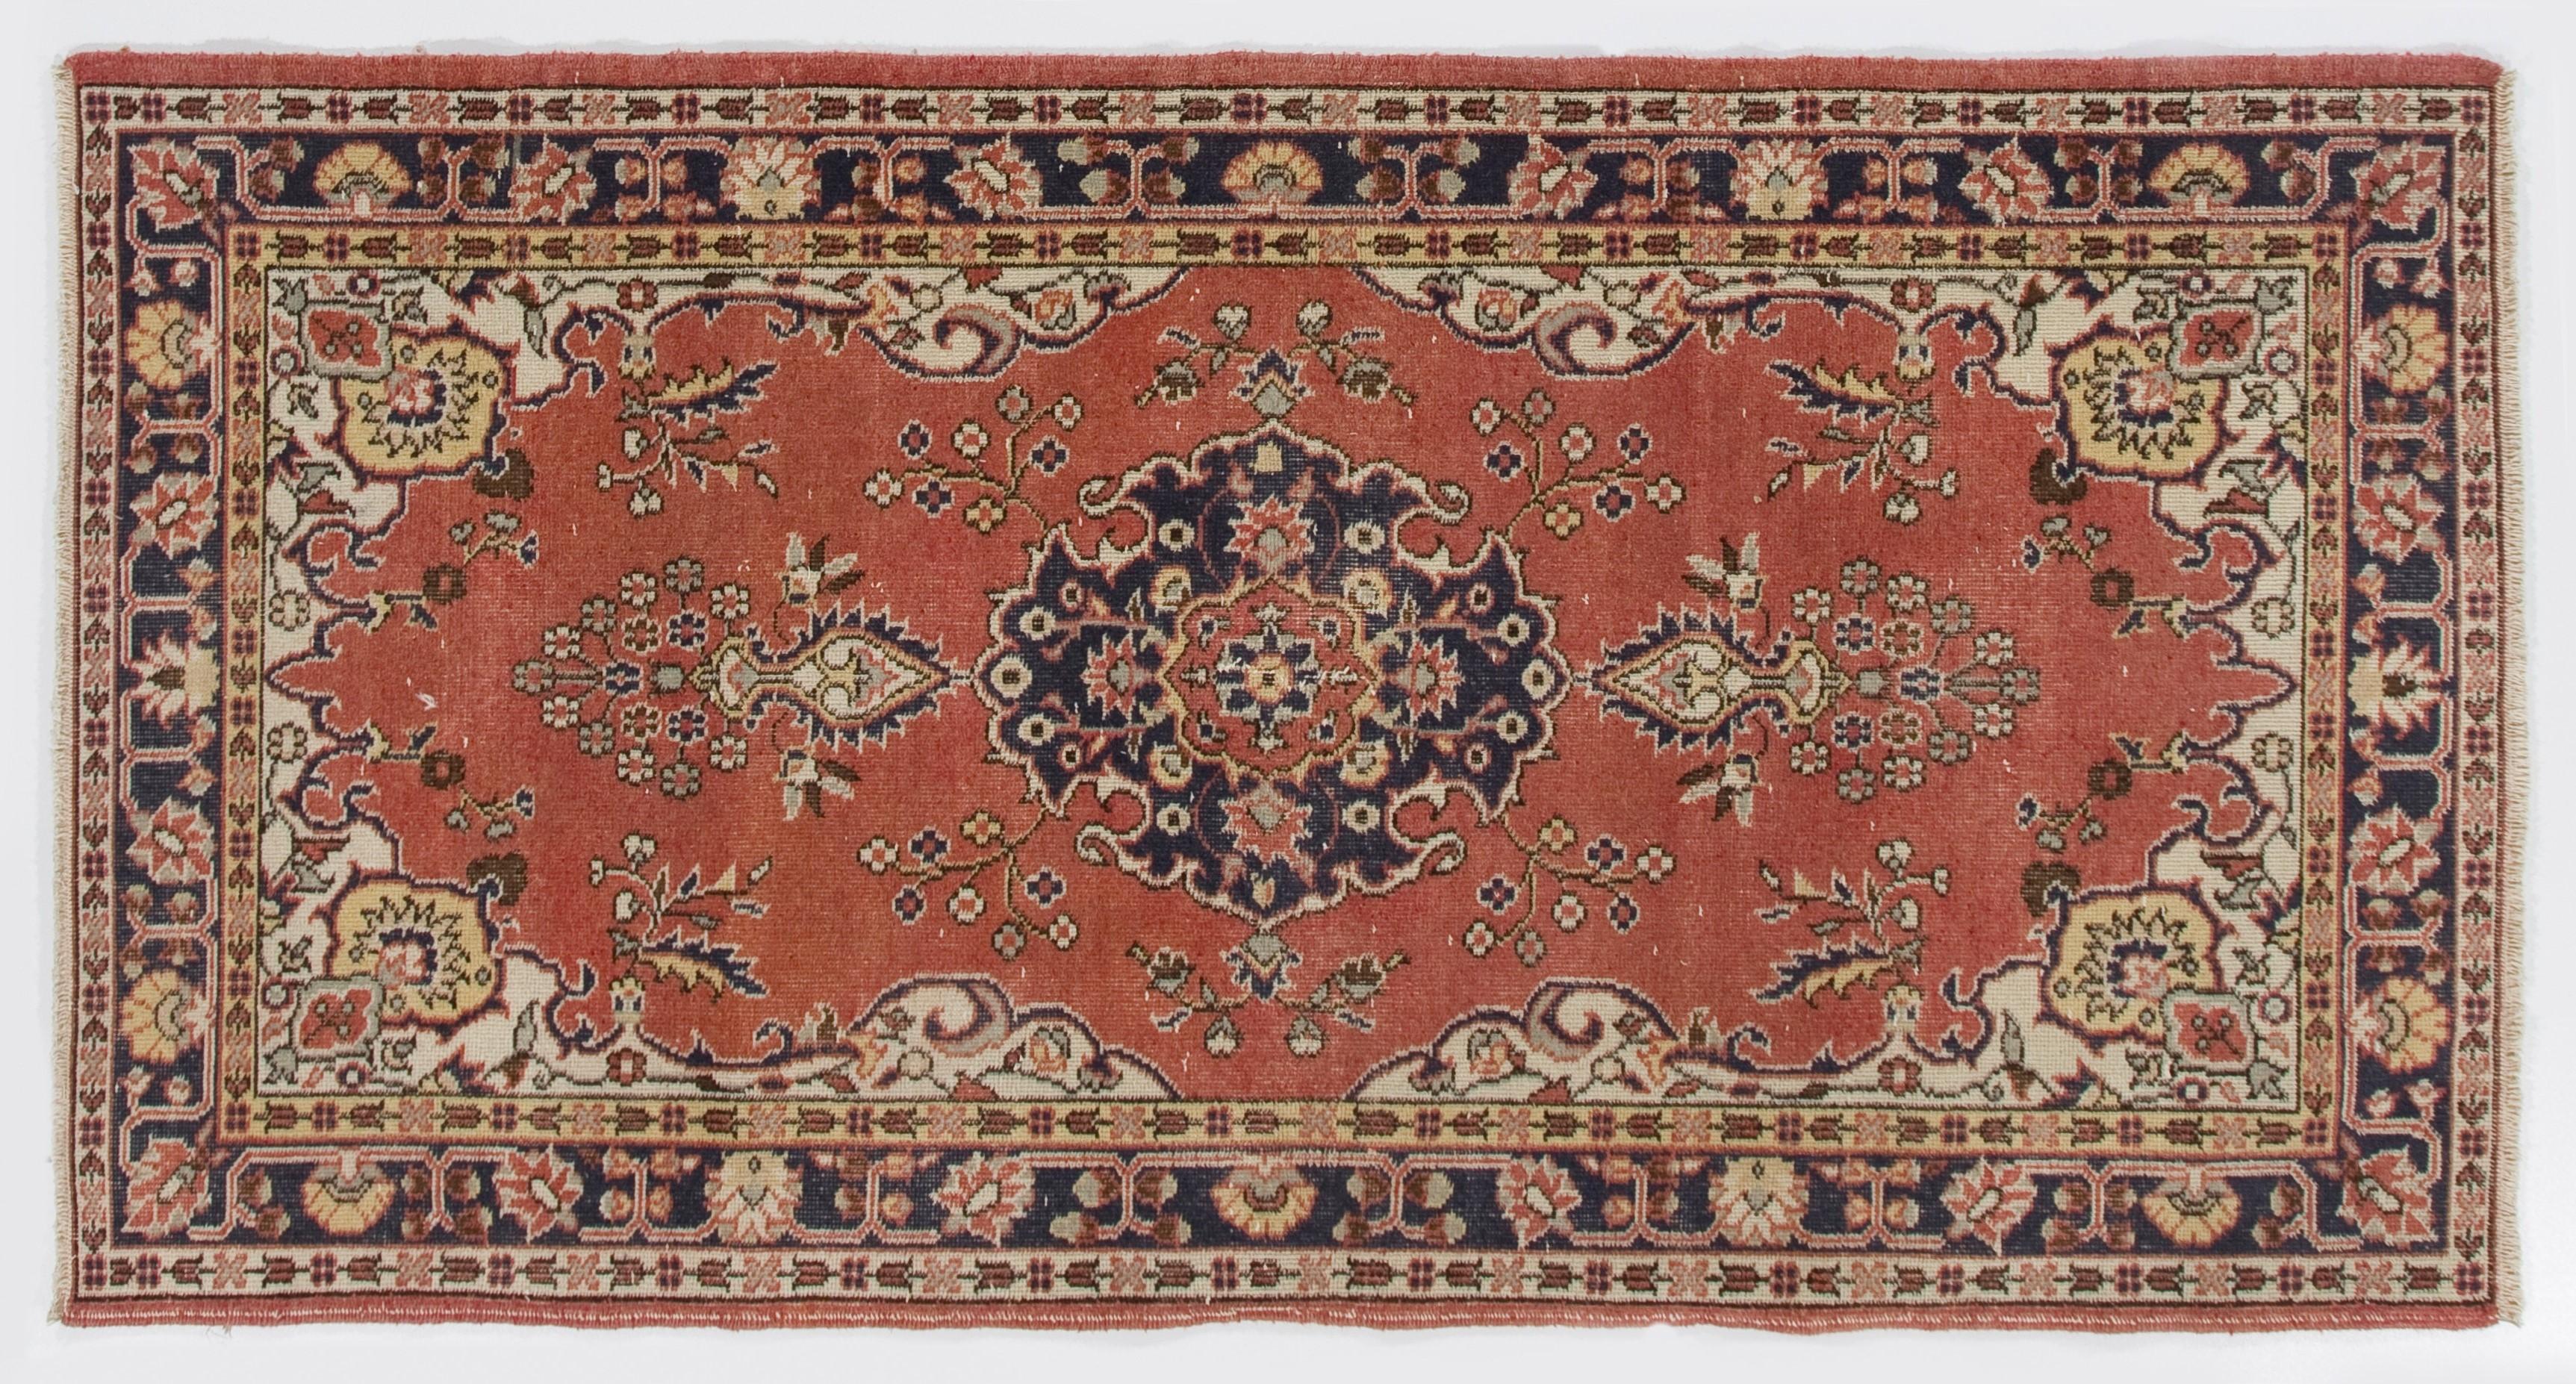 Wool 4x7.3 Ft One-of-a-Kind Vintage Floral Hand-Knotted Turkish Rug in Red & Ivory For Sale